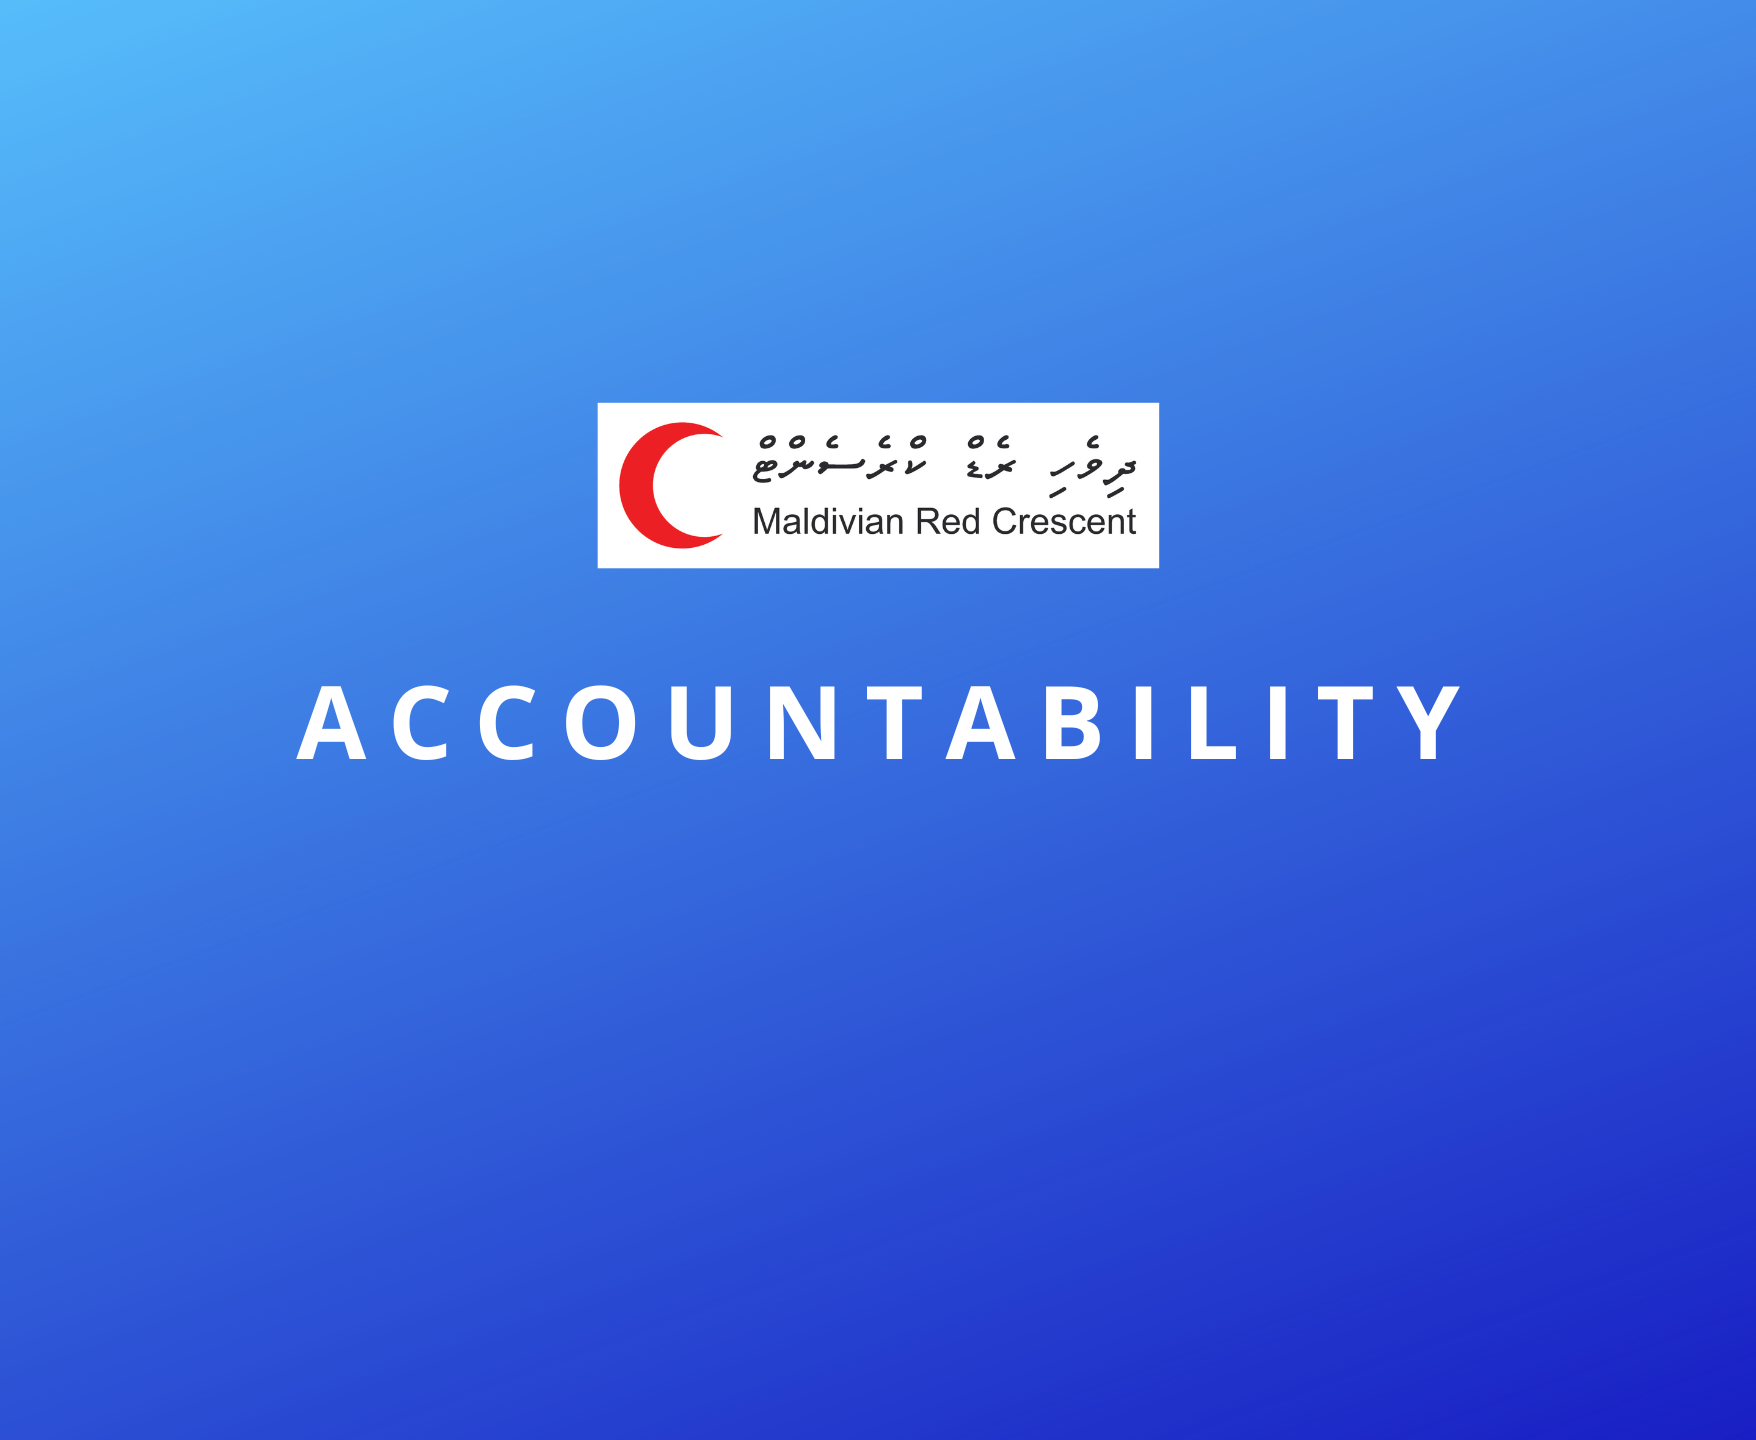 Image for resource collection Accountability